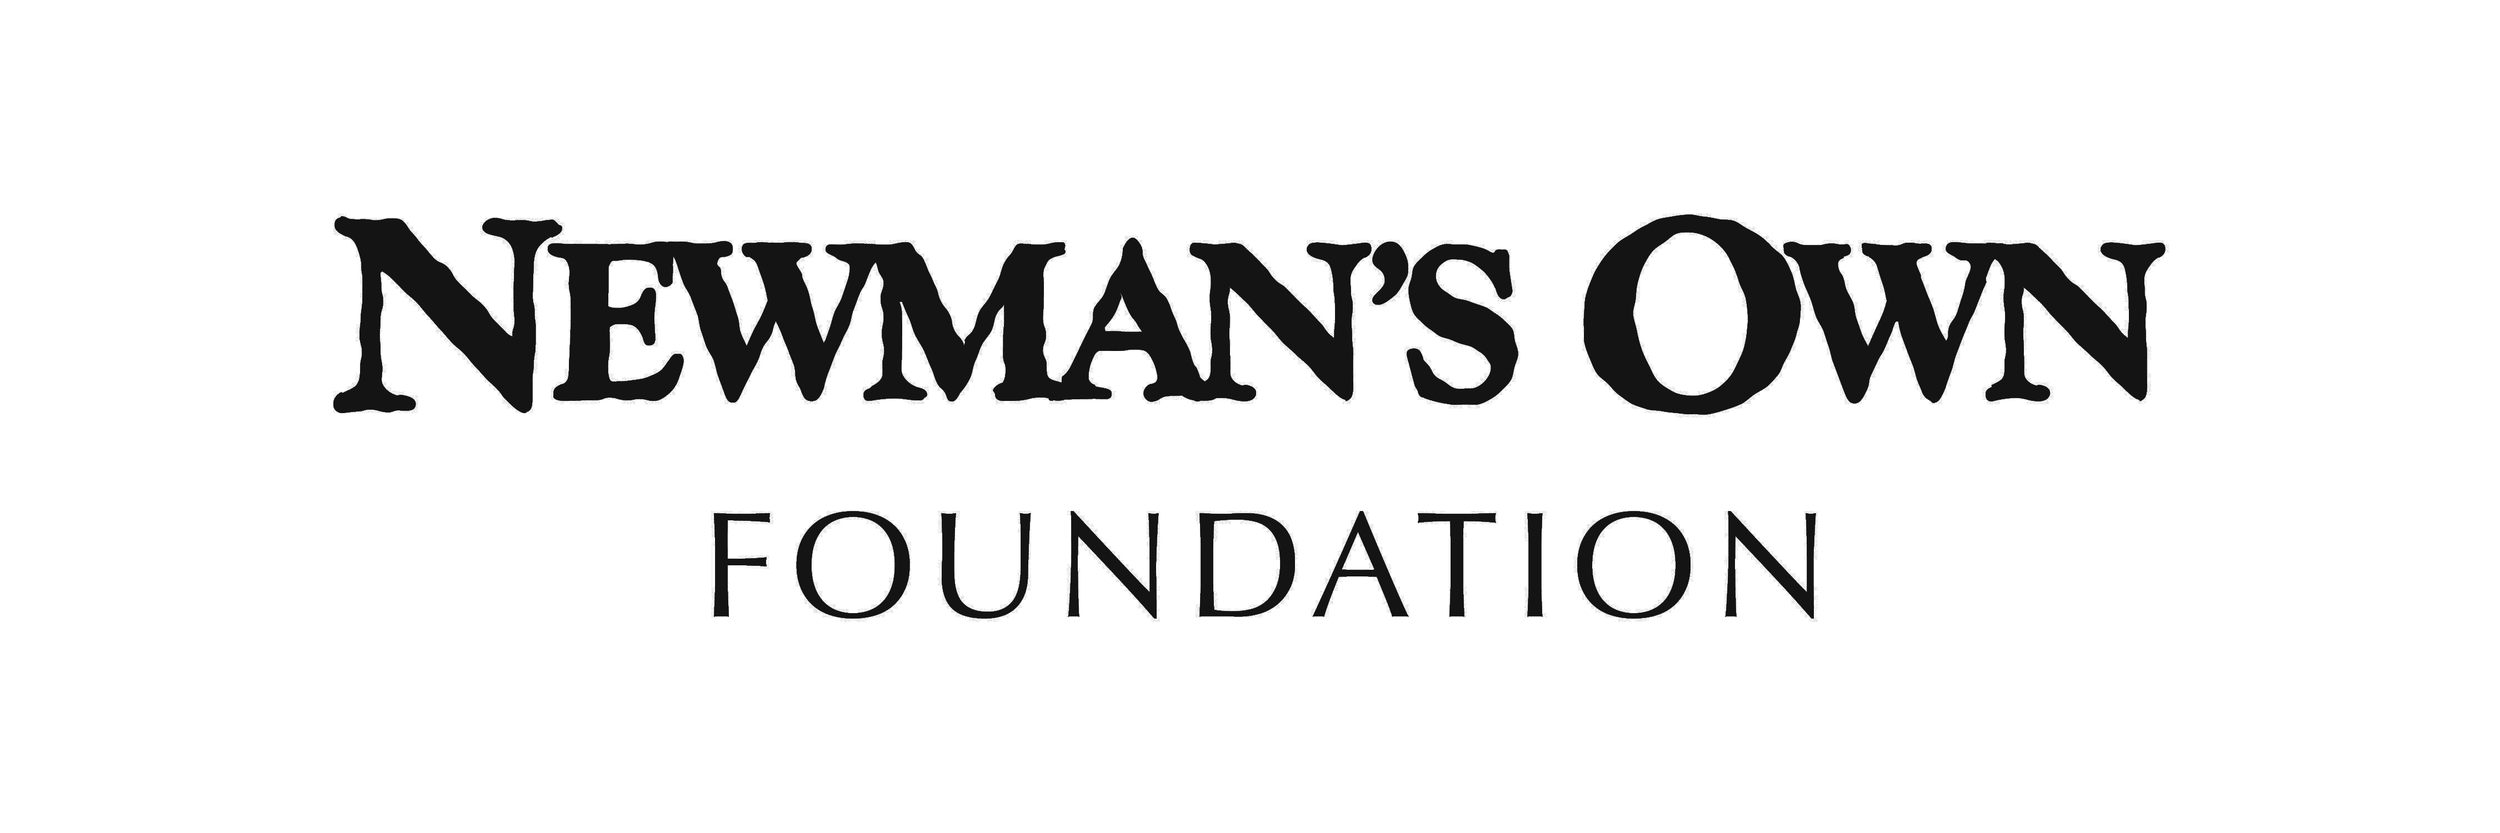 Newmans_Own_Foundation_Logo_Large.png